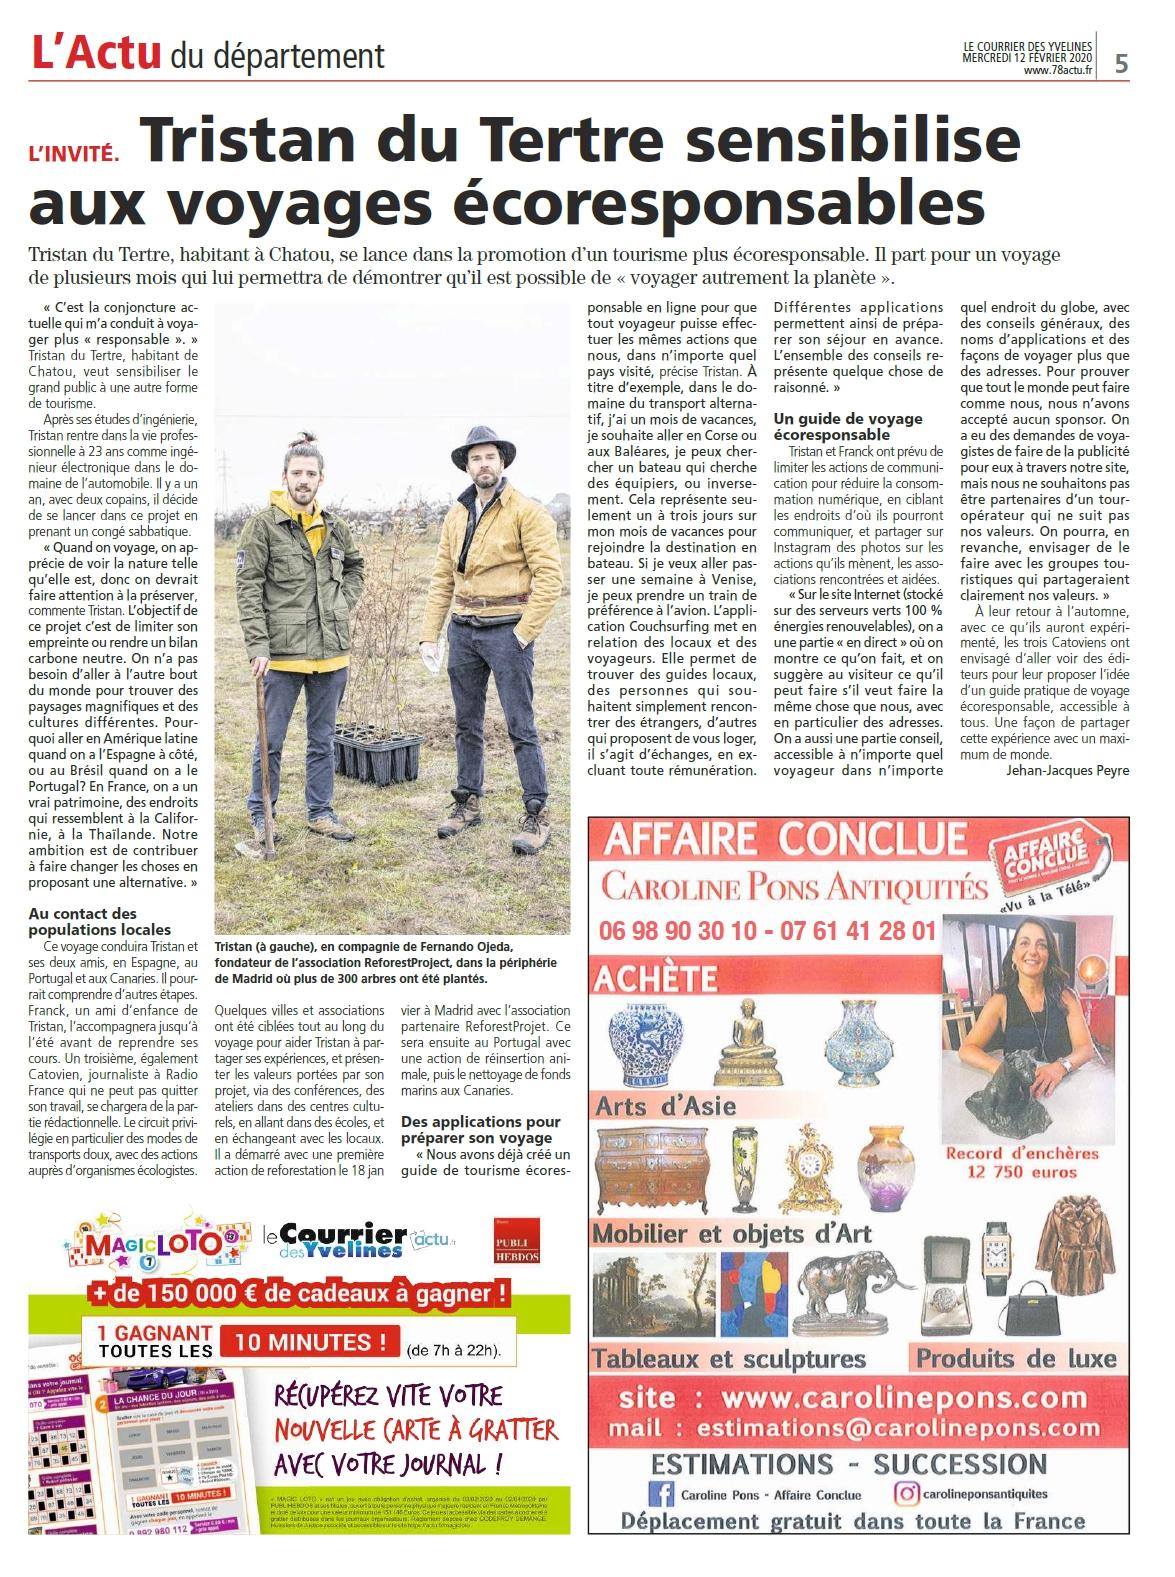 We talk about it in le Courrier Des Yvelines